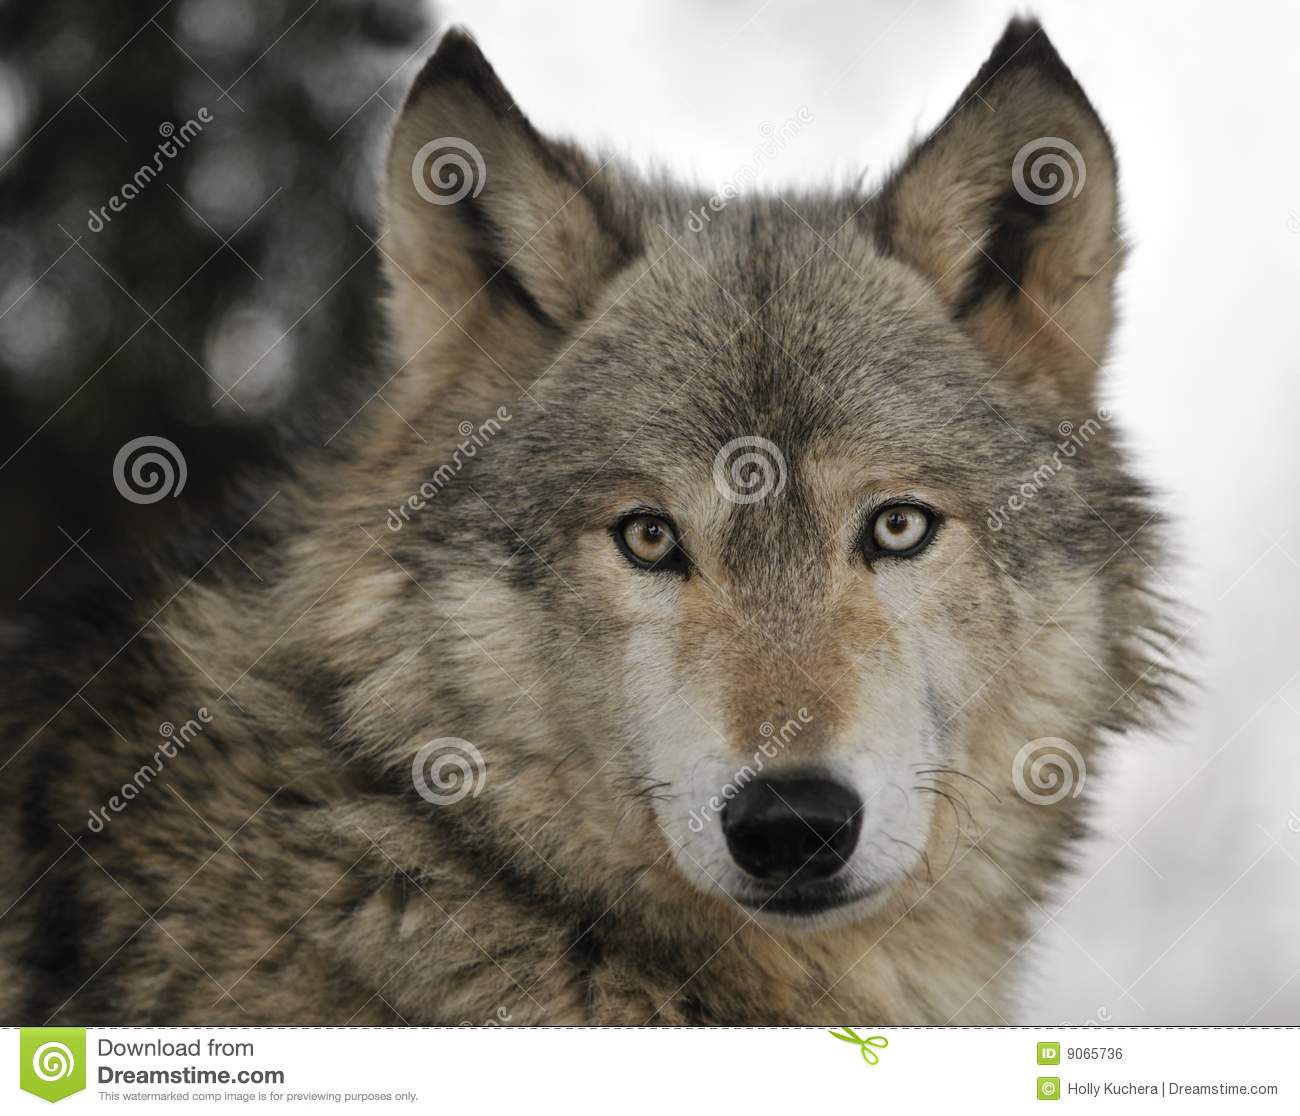 Timber Wolf Portrait Royalty Free Stock Image   Image  9065736